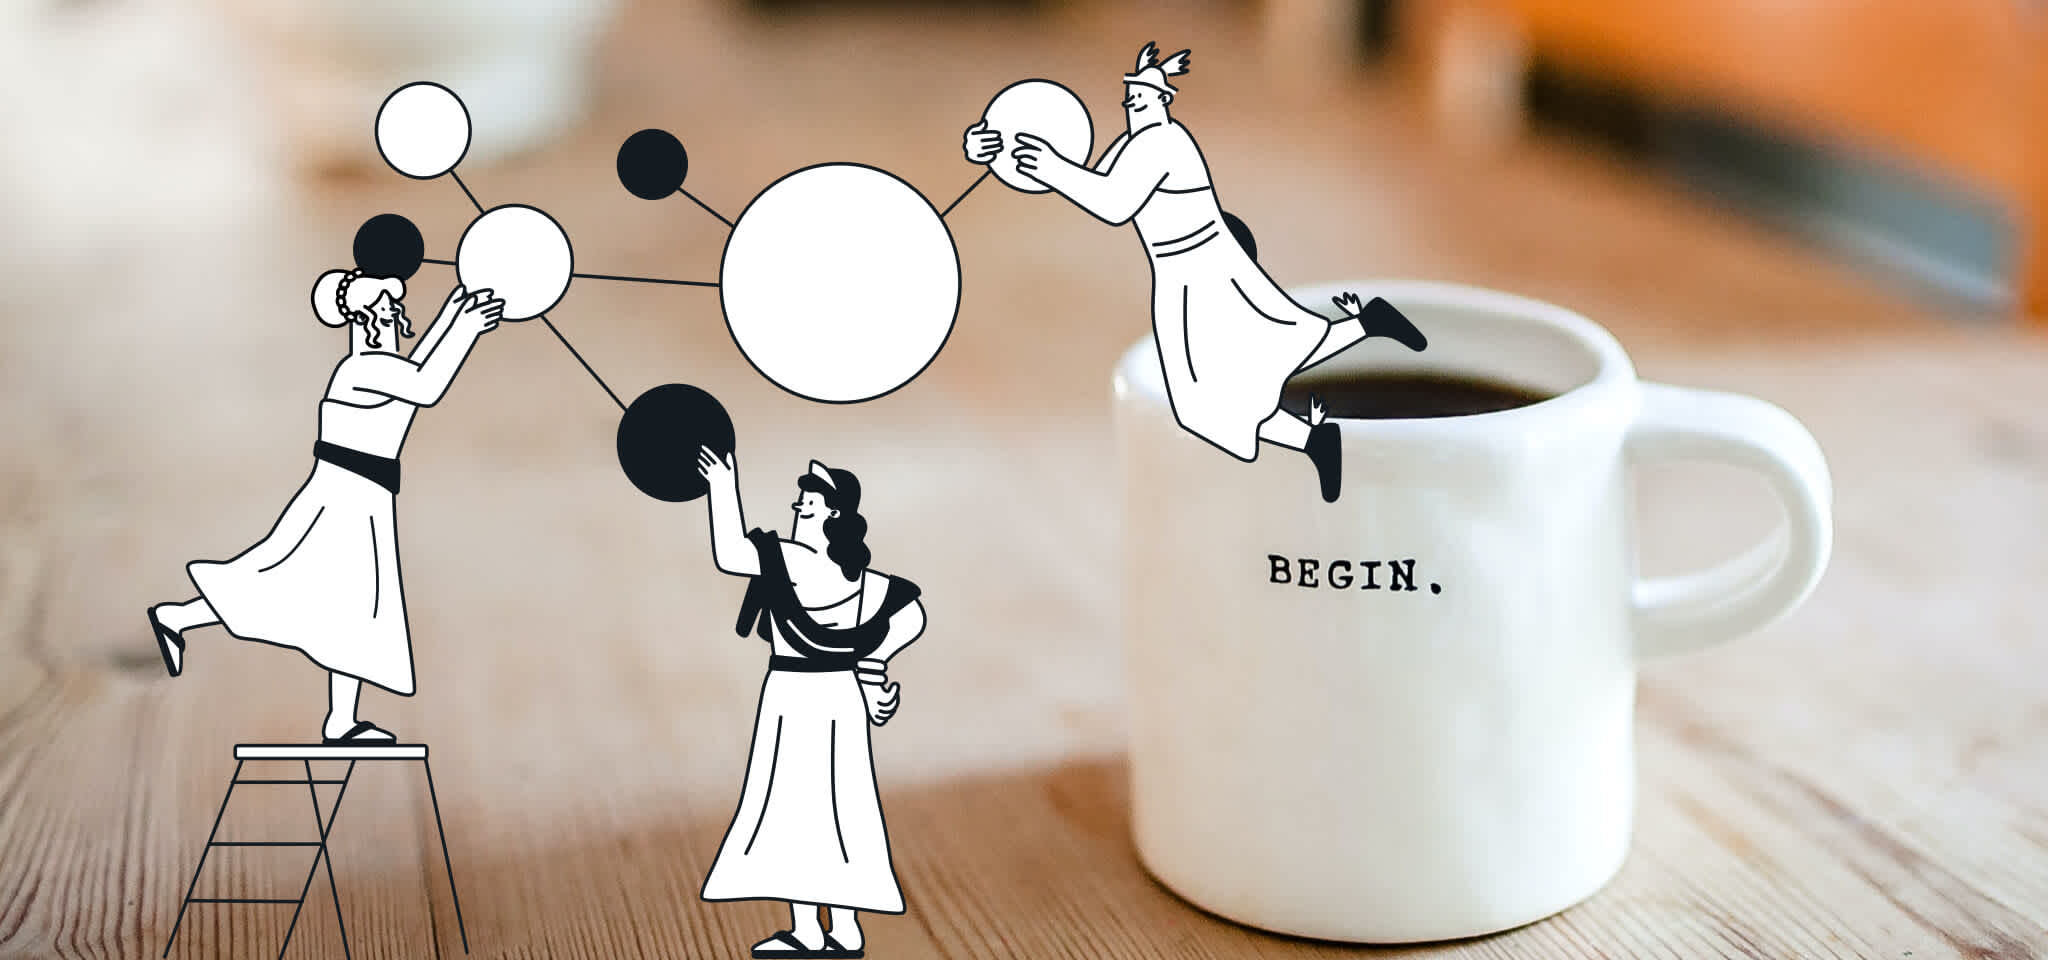 Hermes and two goddesses hang up some spheres in front of a mug